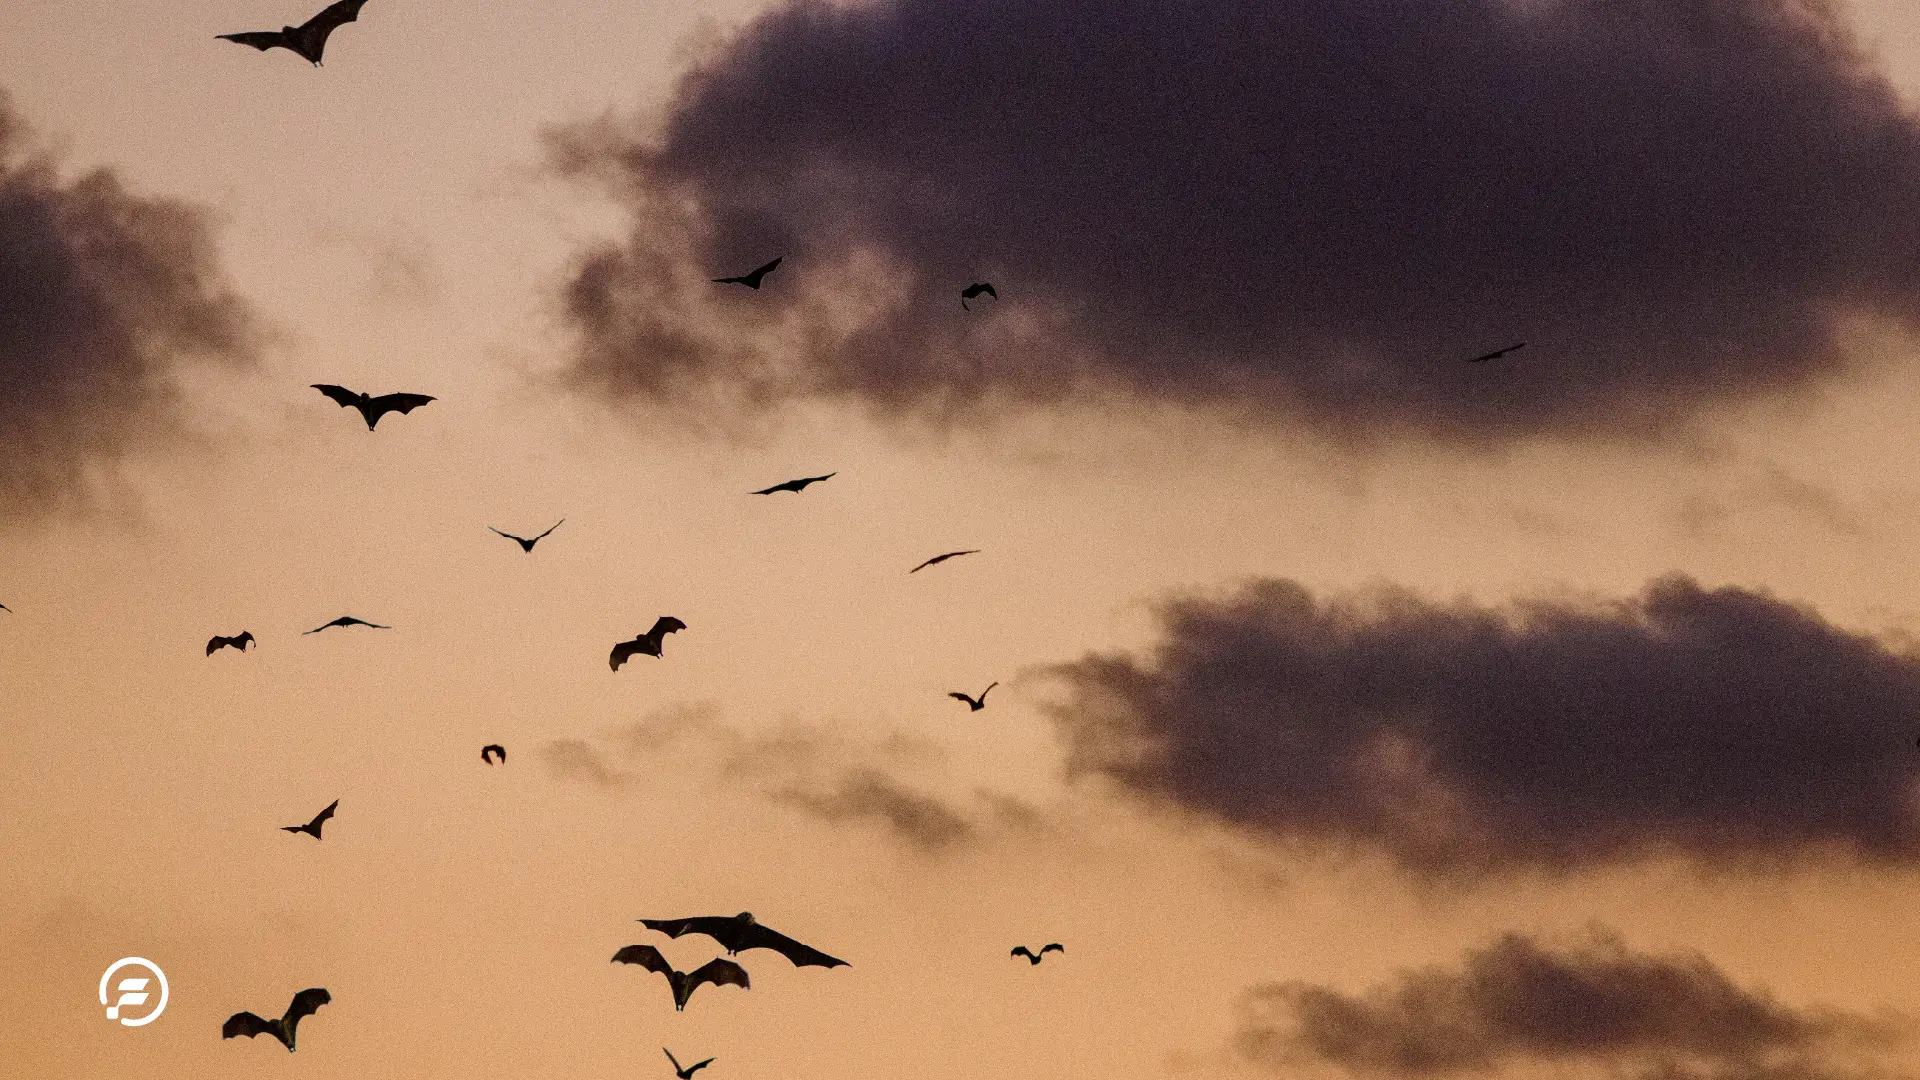 A swarm of bats flying during dusk.